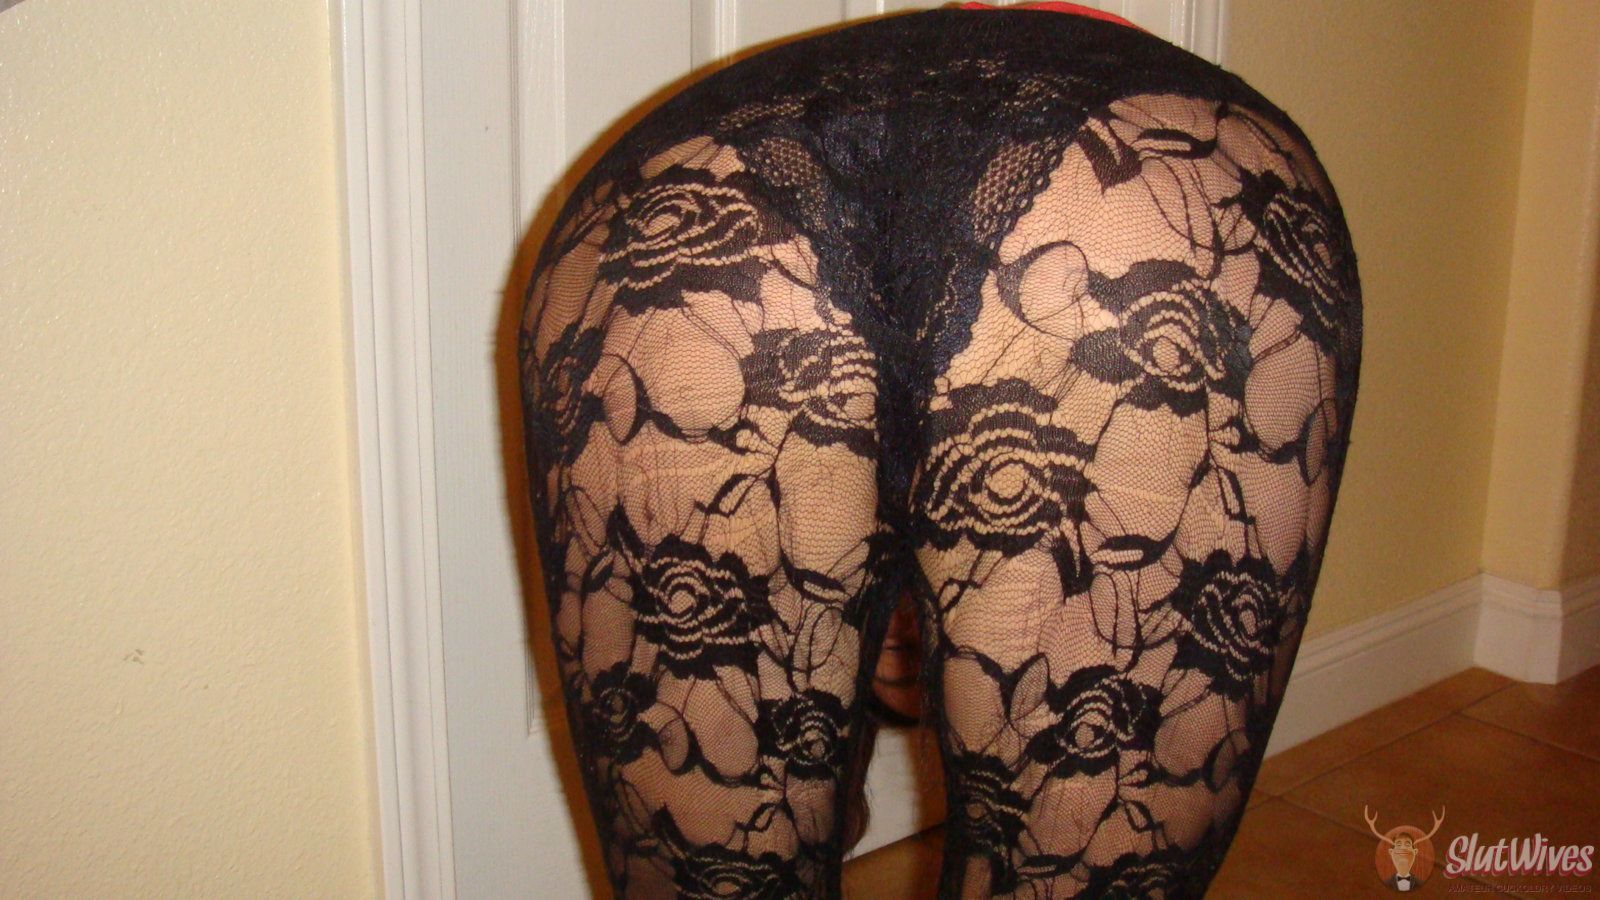 Her laced pantyhose 2